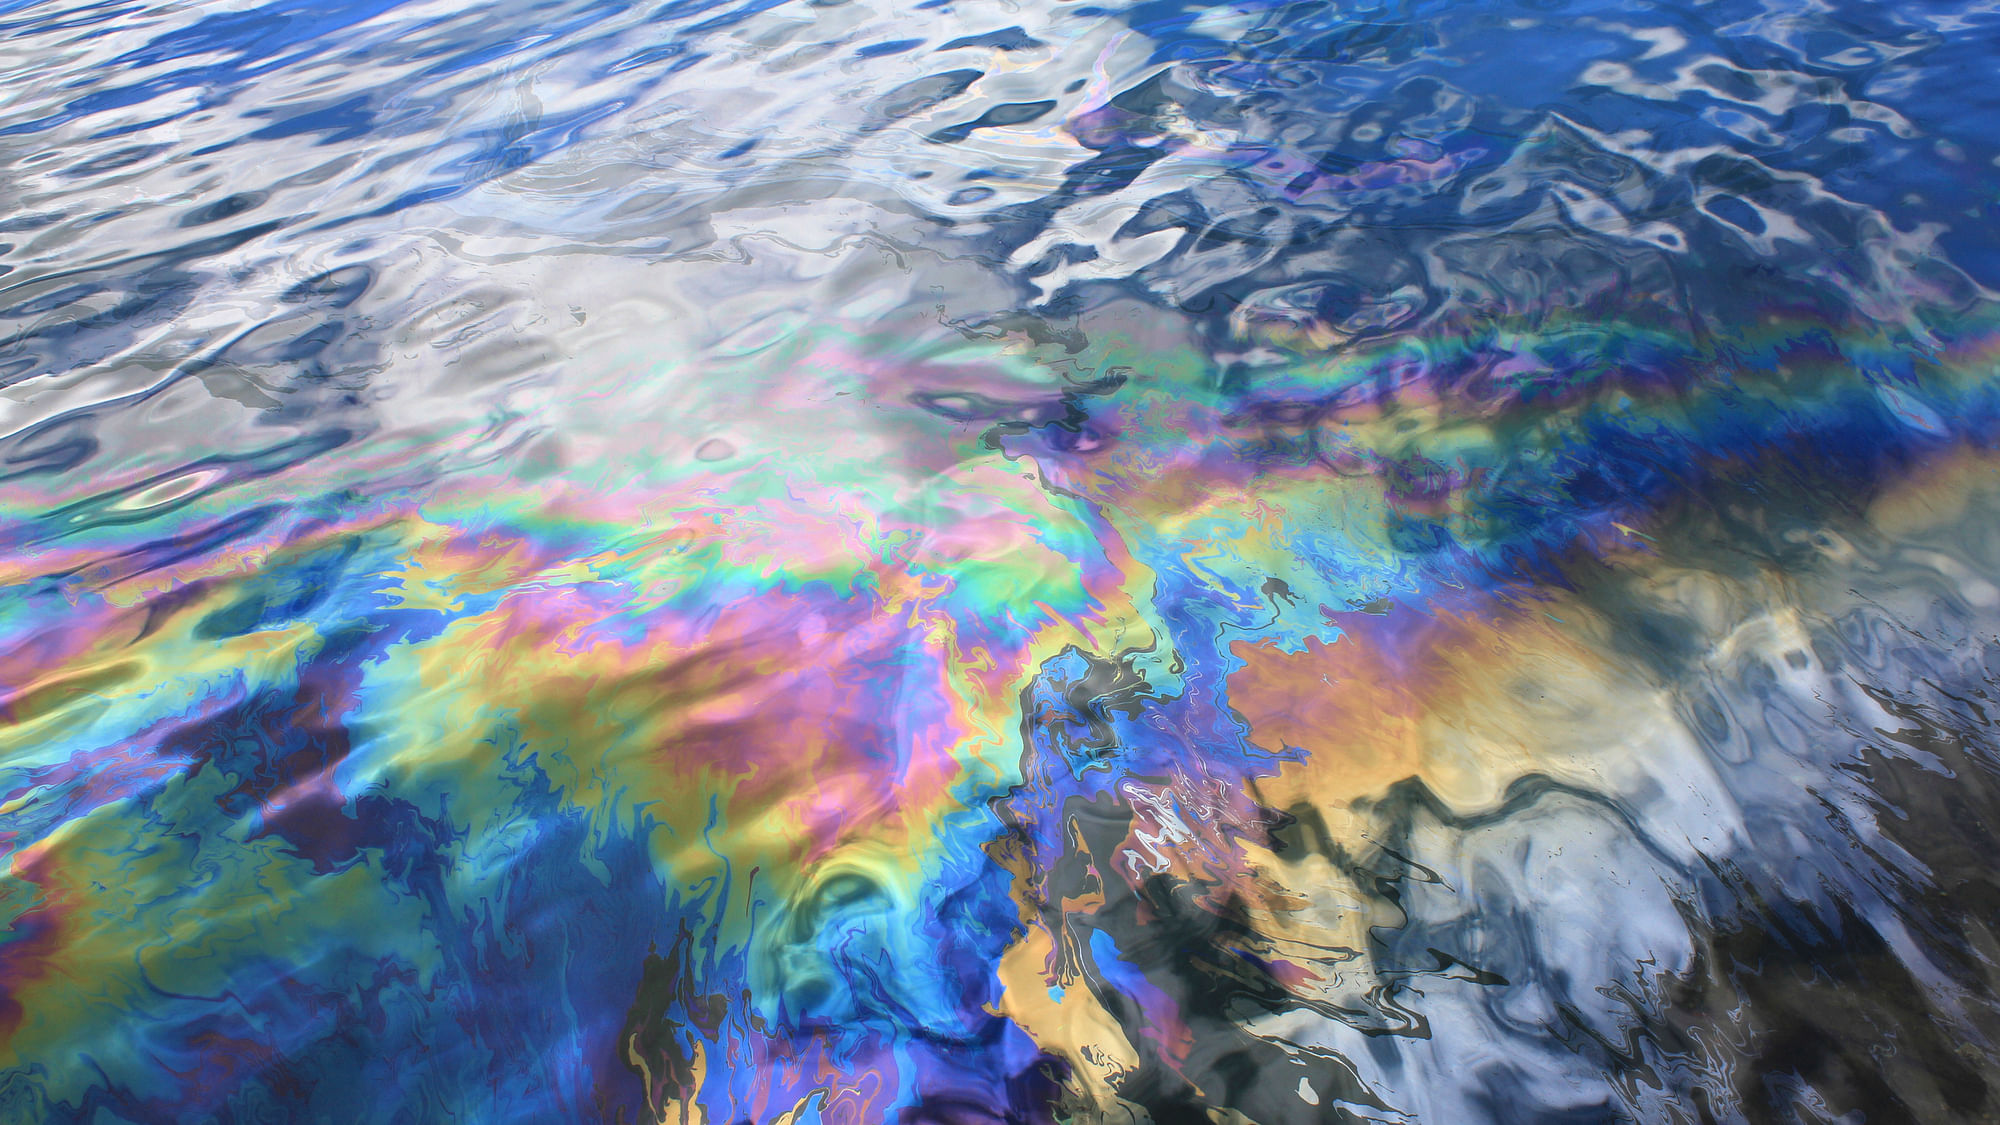 Bacteria could hold the key to addressing oil spills. (Photo: iStock)